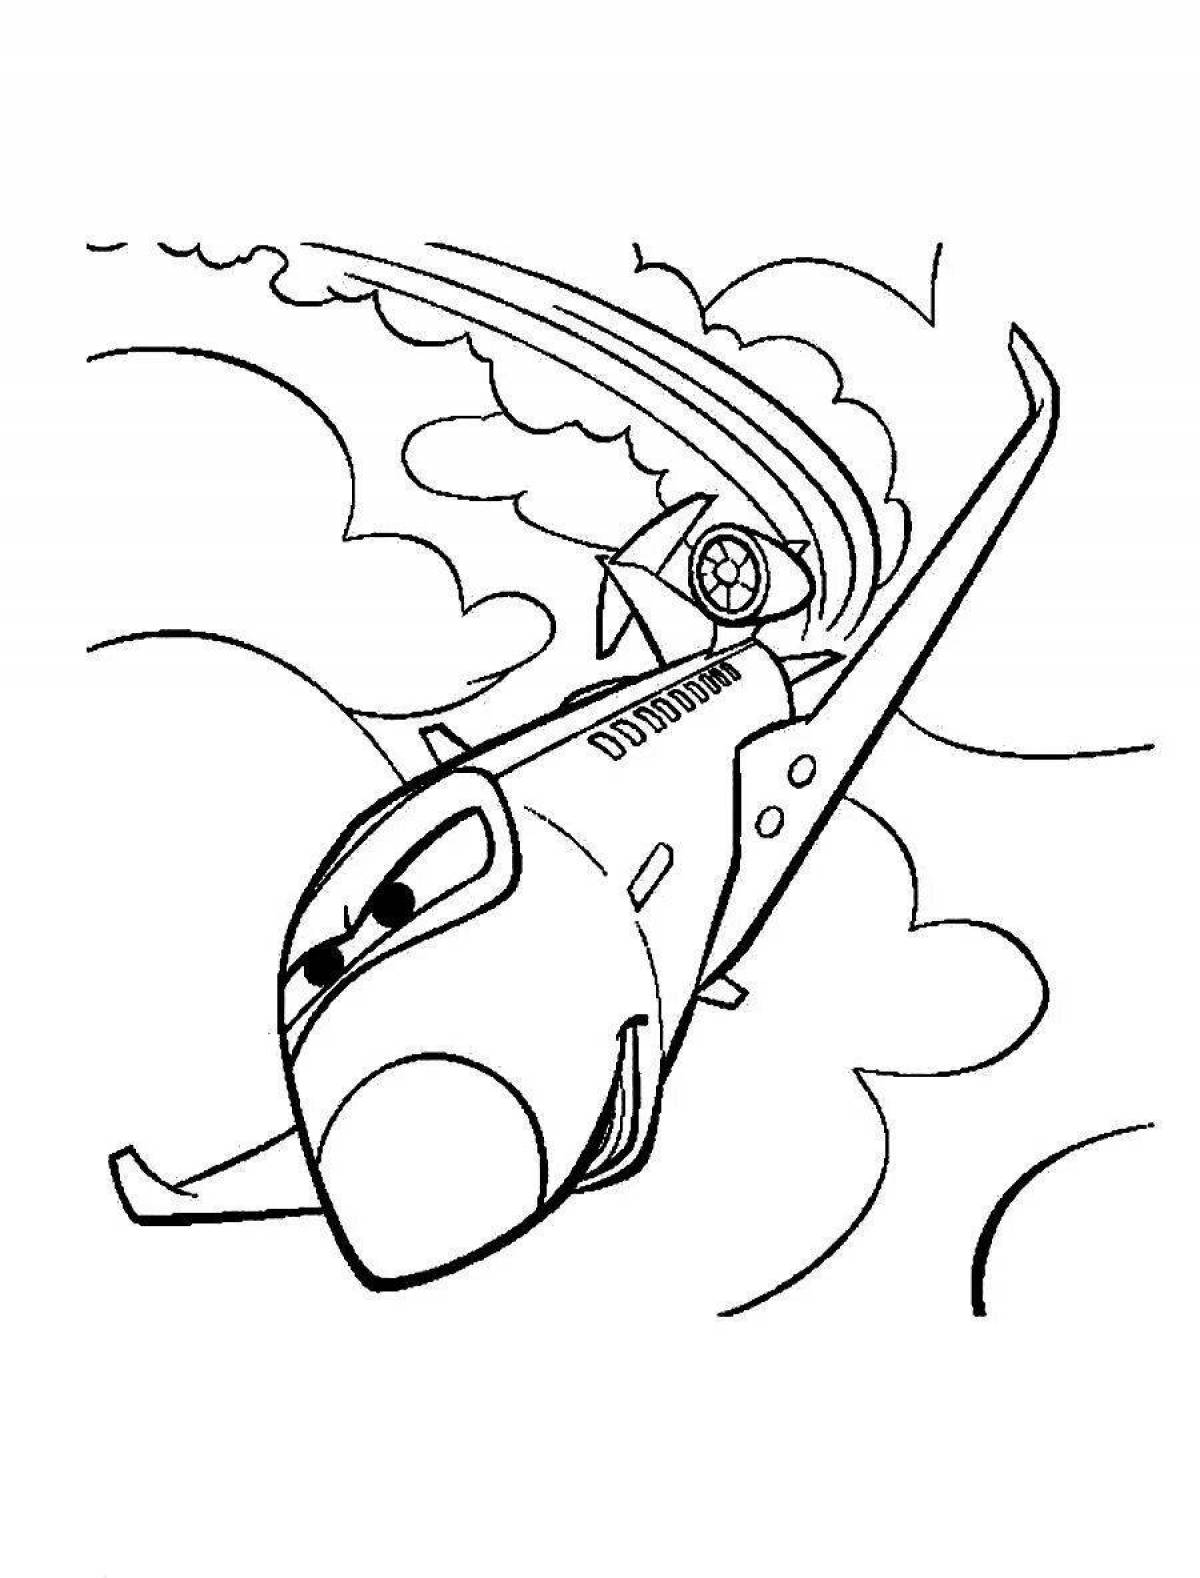 Hudson's animated coloring page